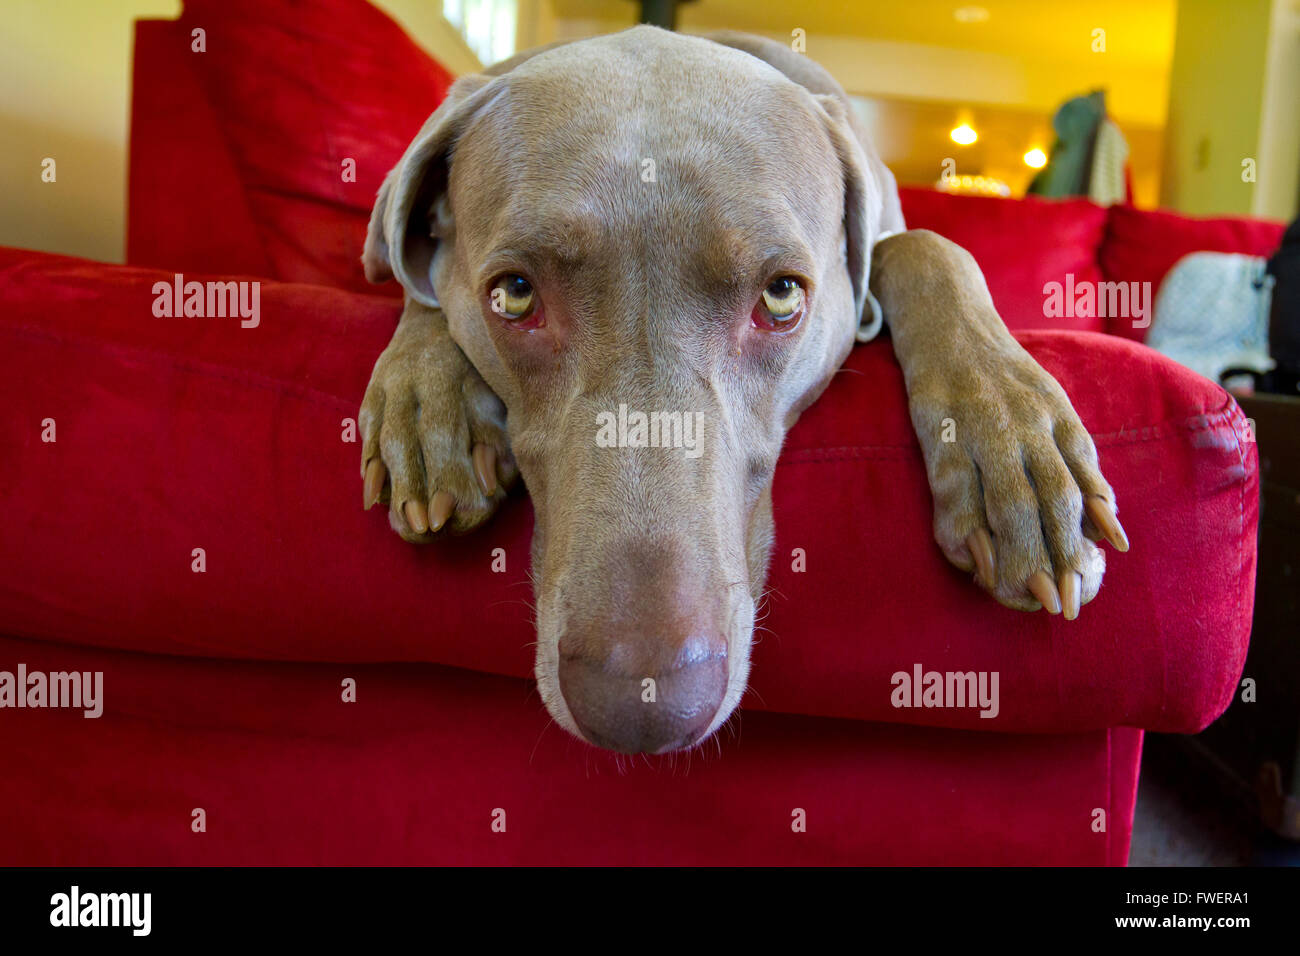 A beautiful grey weimaraner dog is relaxing on a bright red couch indoors. Stock Photo